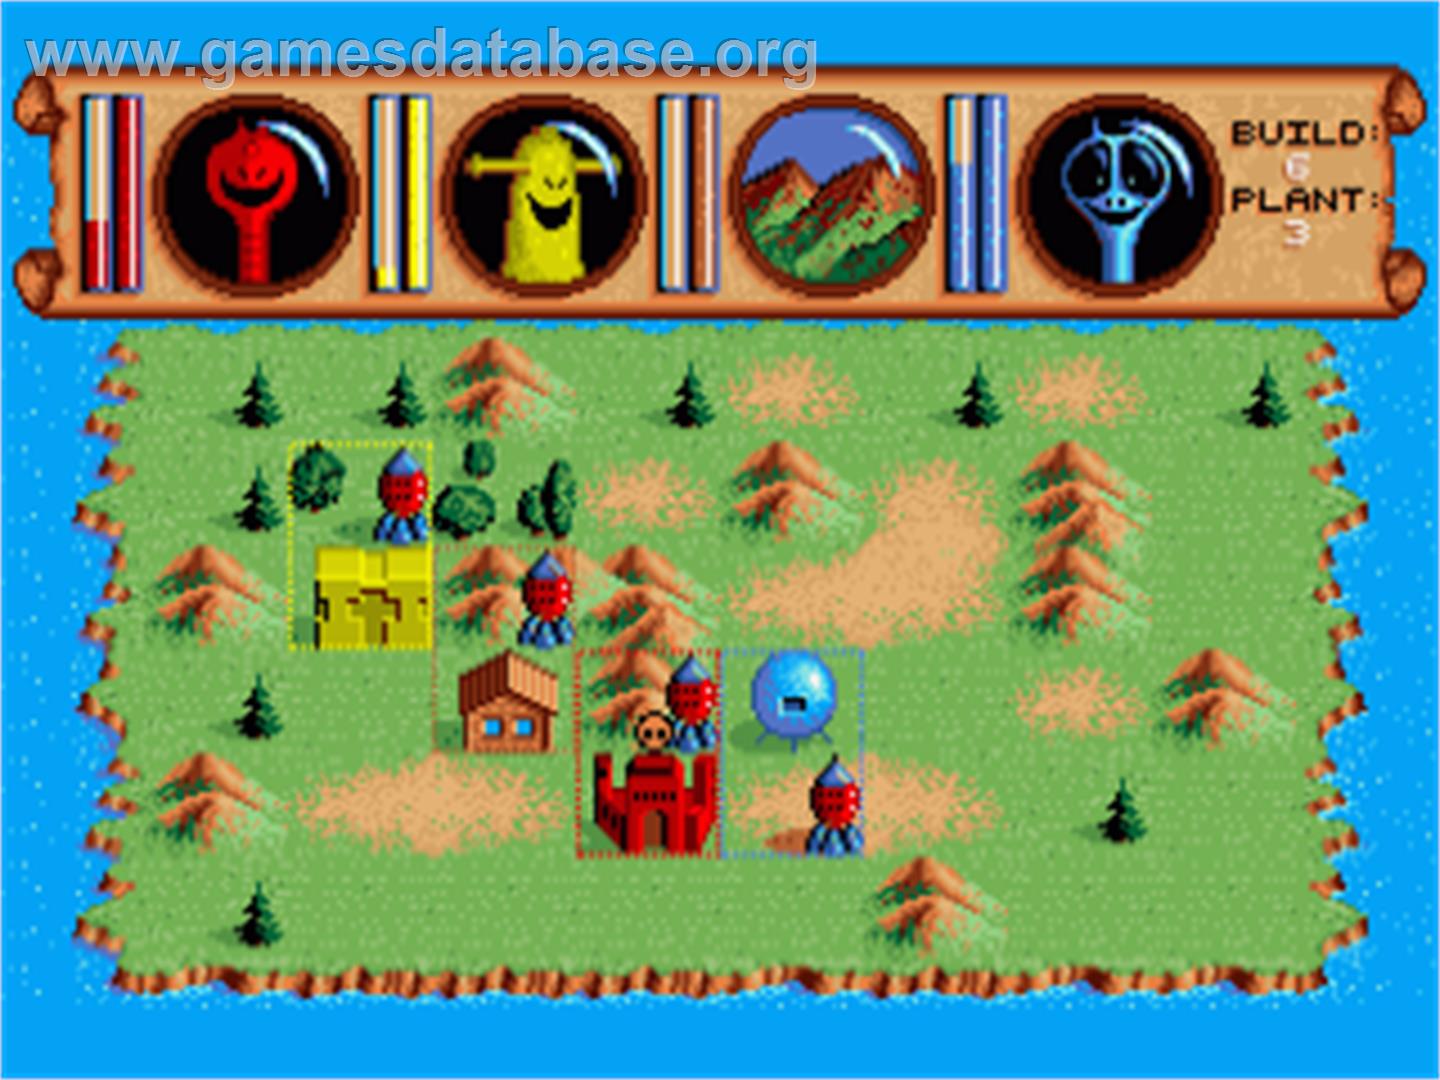 Traders-_The_Intergalactic_Trading_Game_-_1991_-_Merit_Software.jpg